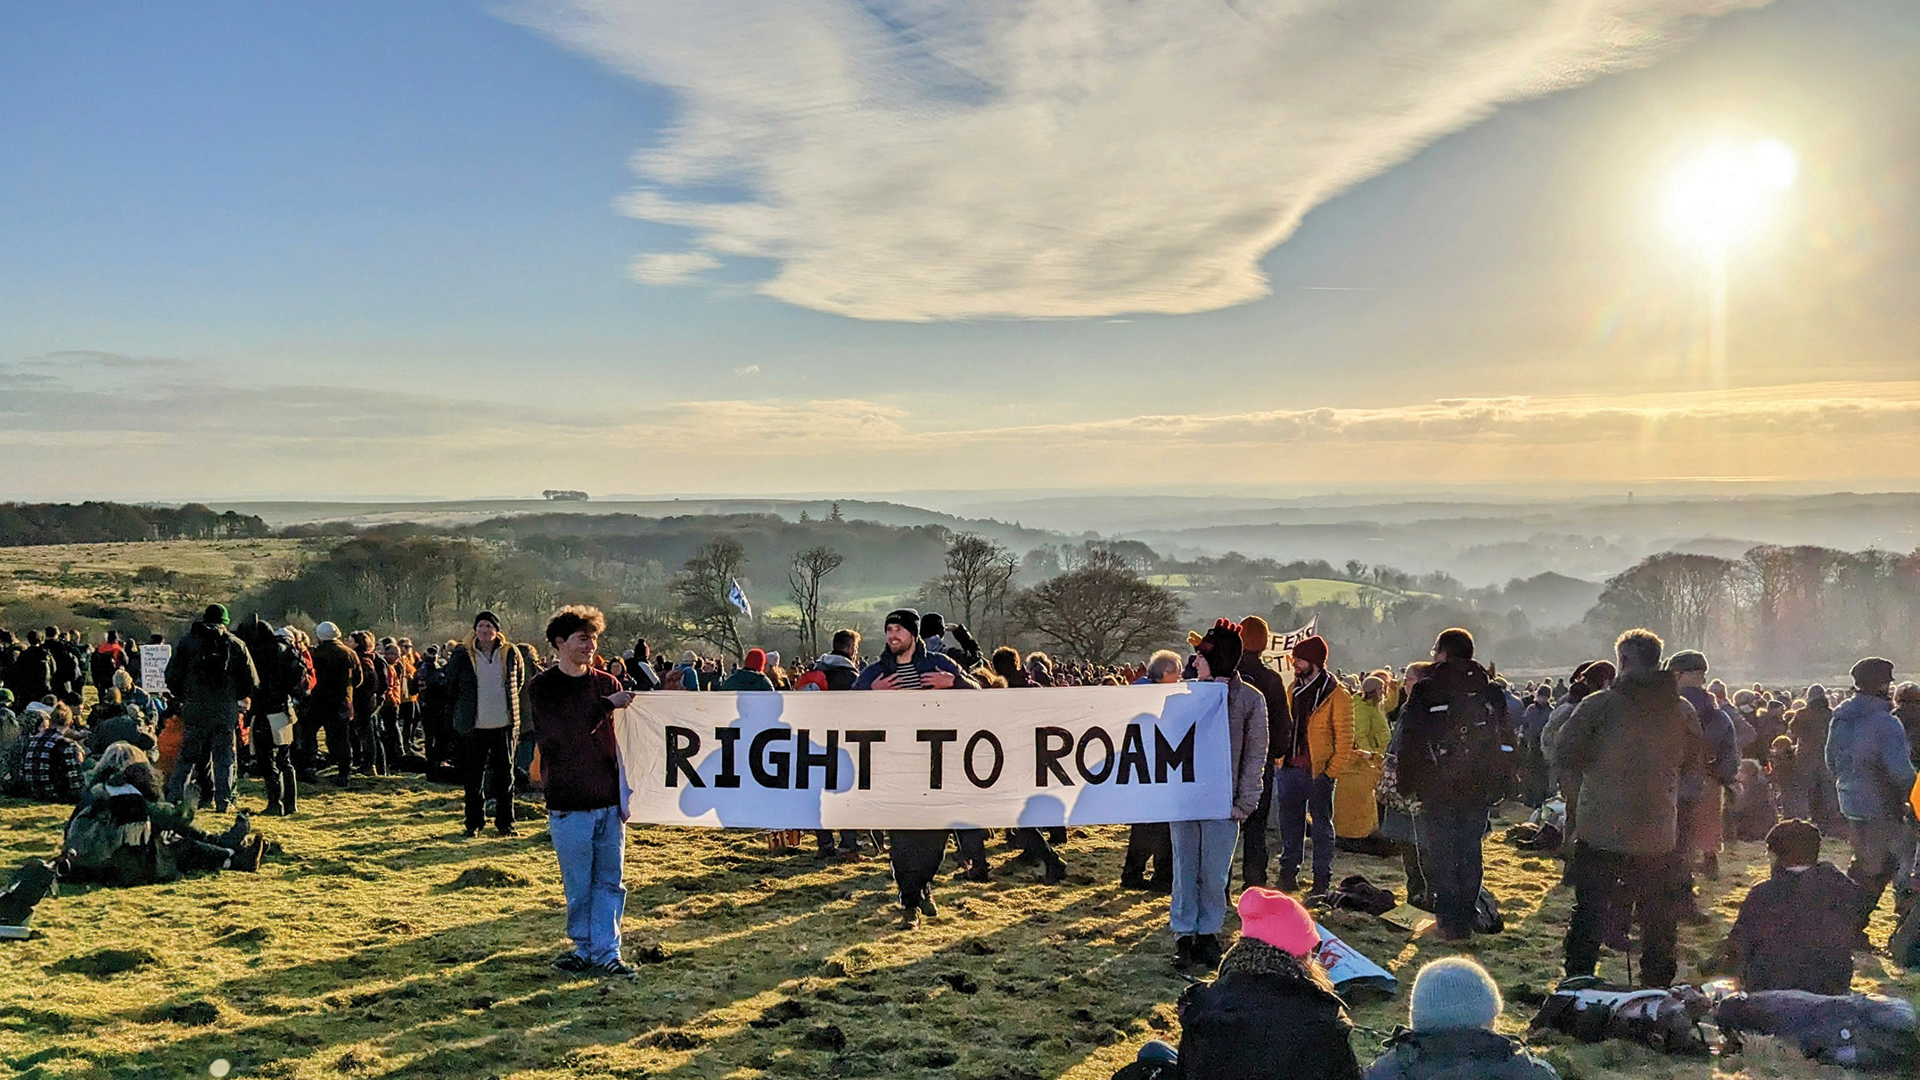 Right to roam protest